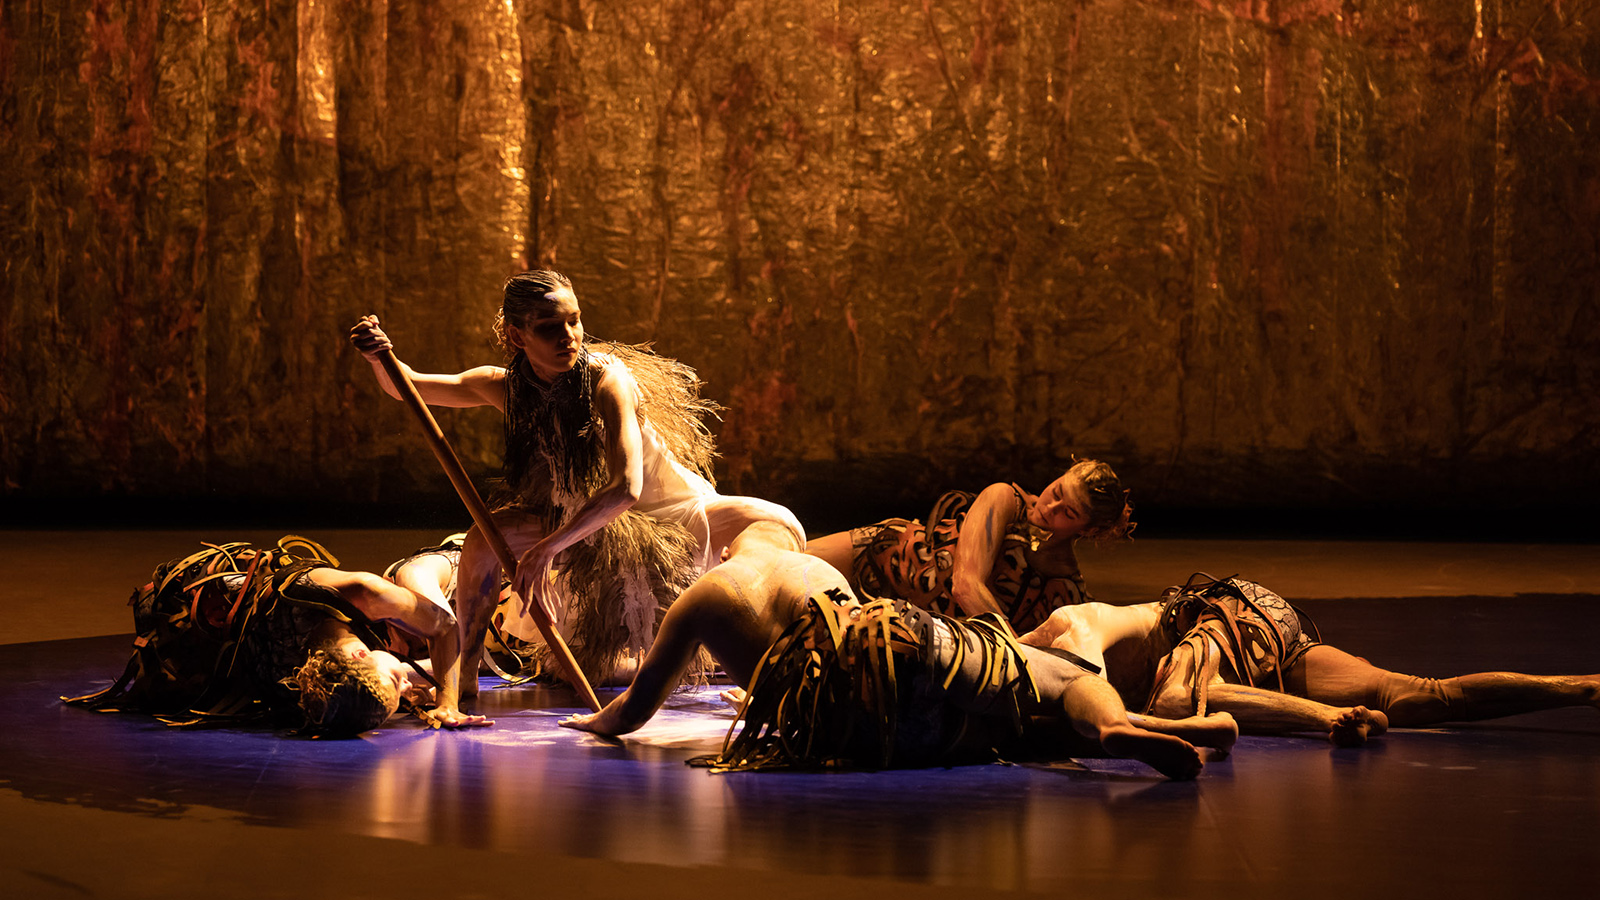 A group of dancers performing a traditional Aboriginal dance on a stage.